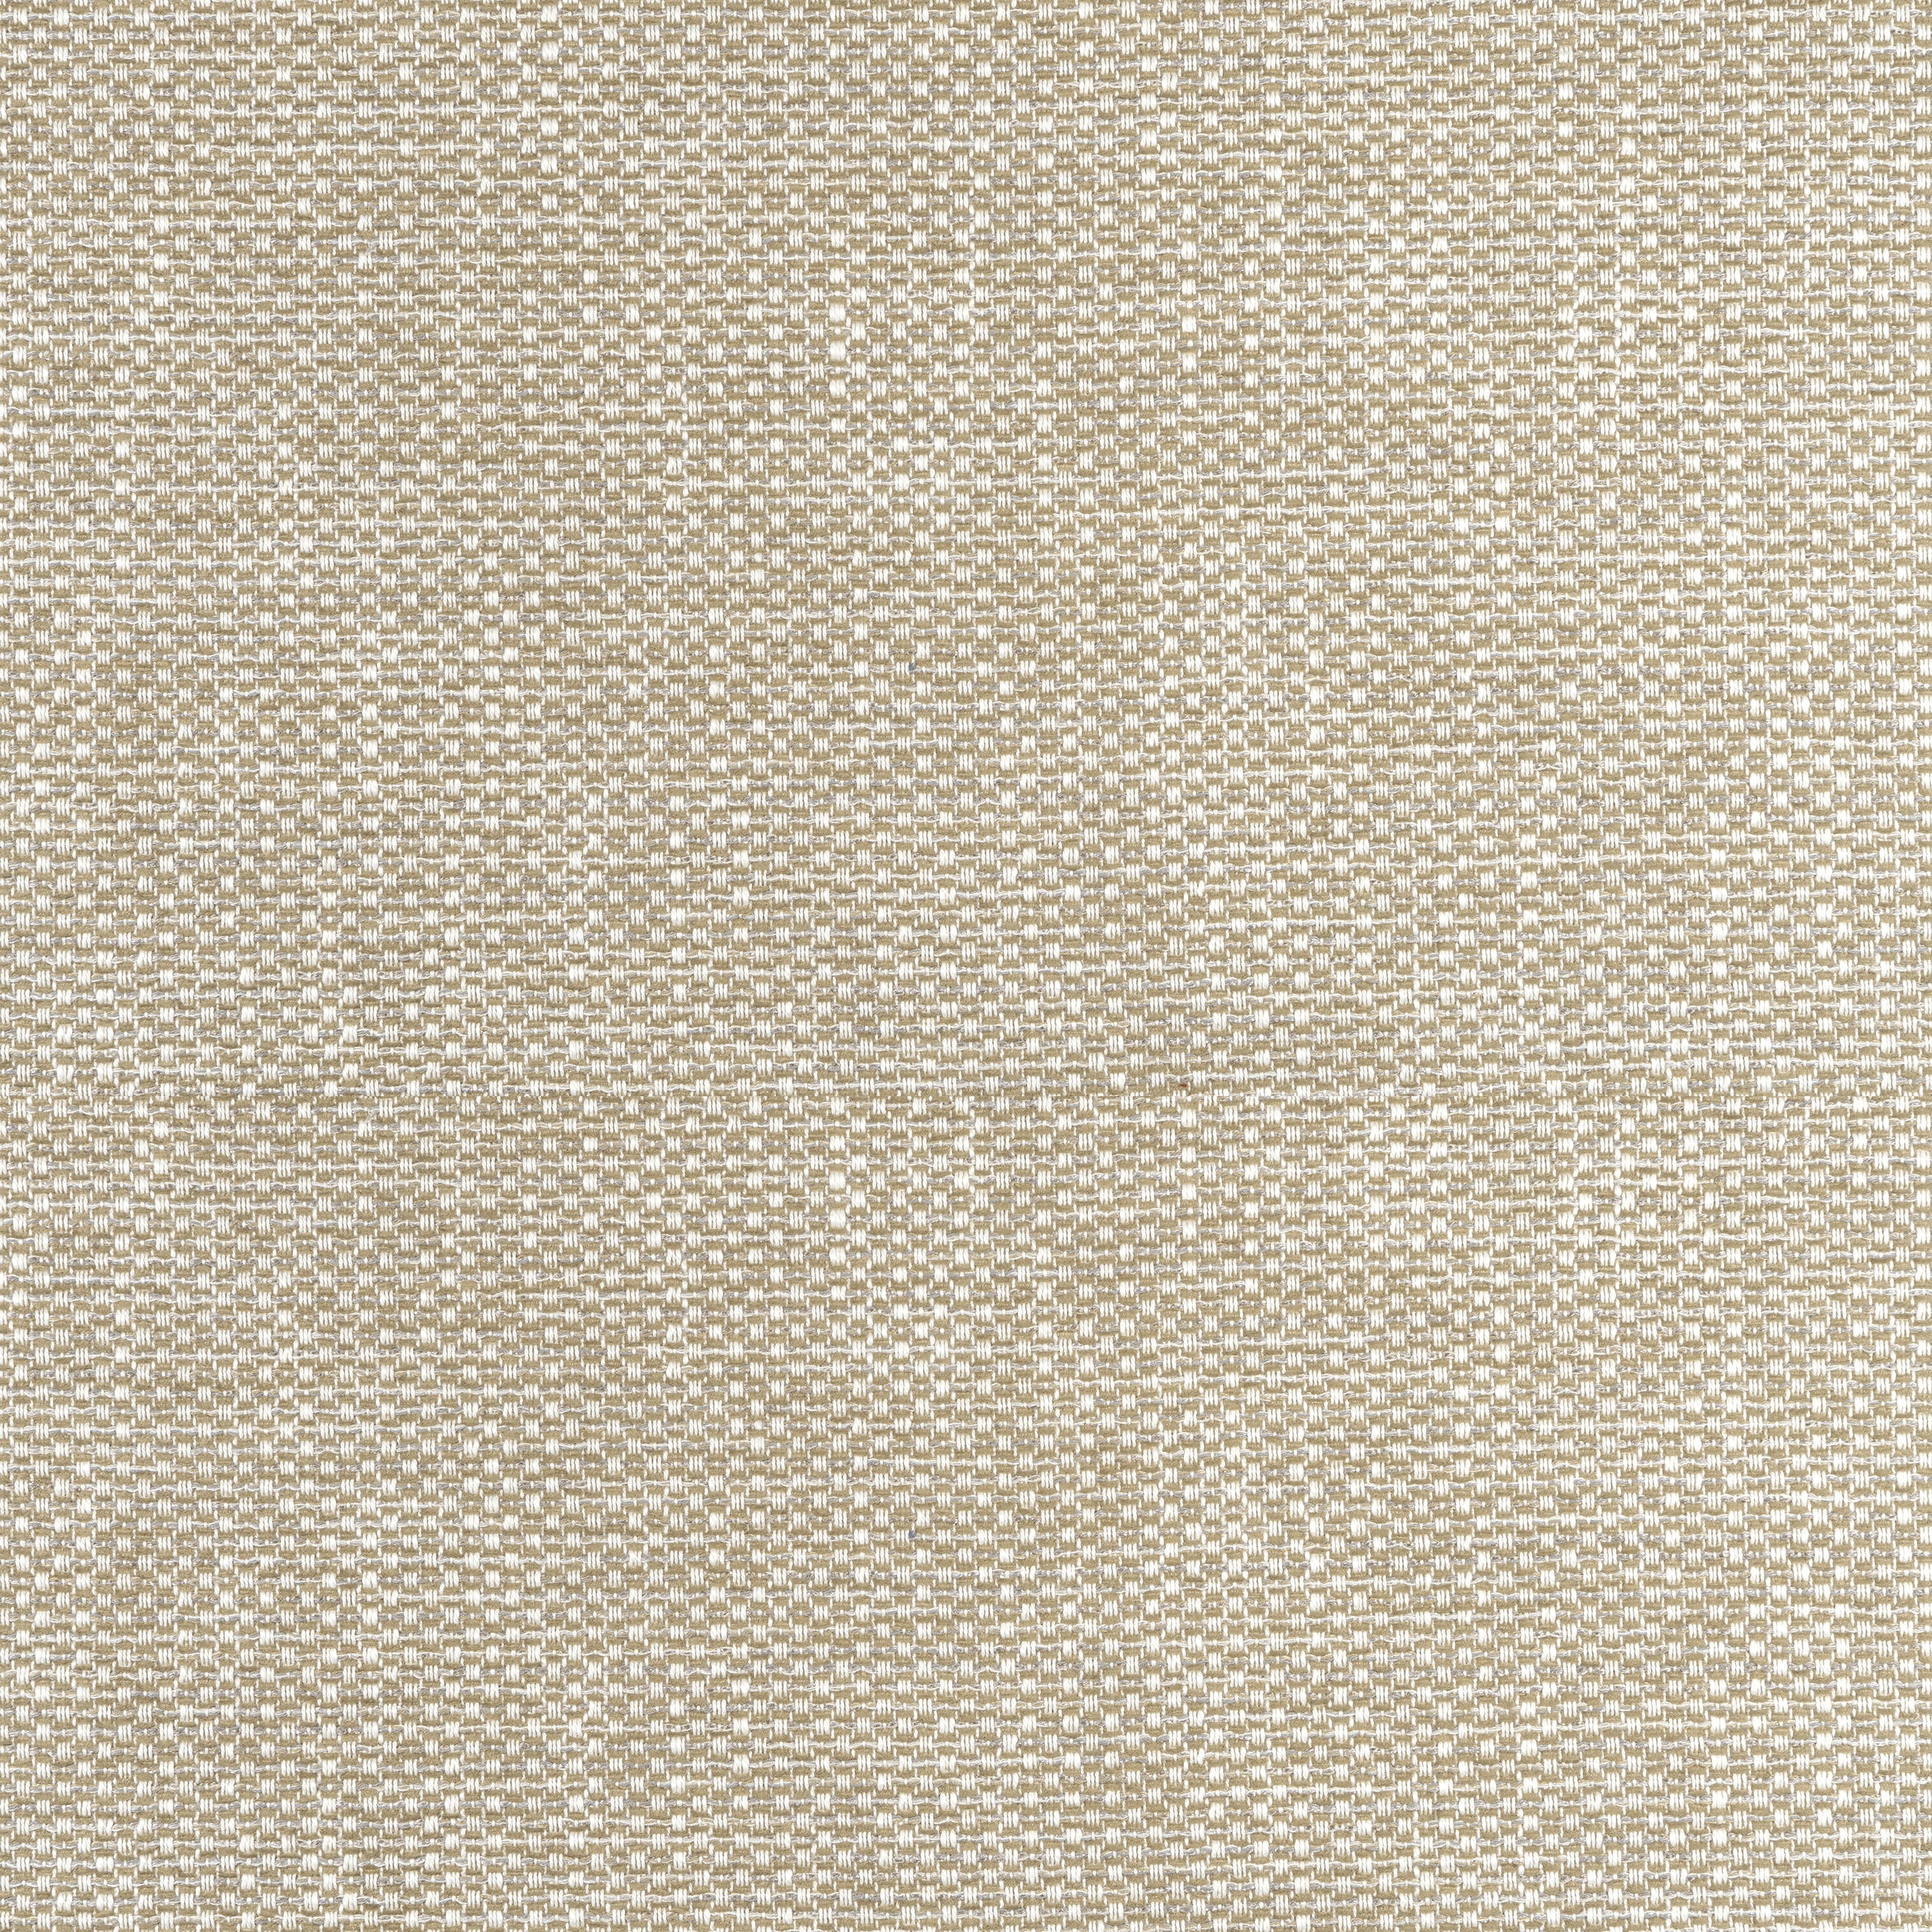 Cascade fabric in camel color - pattern number W75256 - by Thibaut in the Elements collection